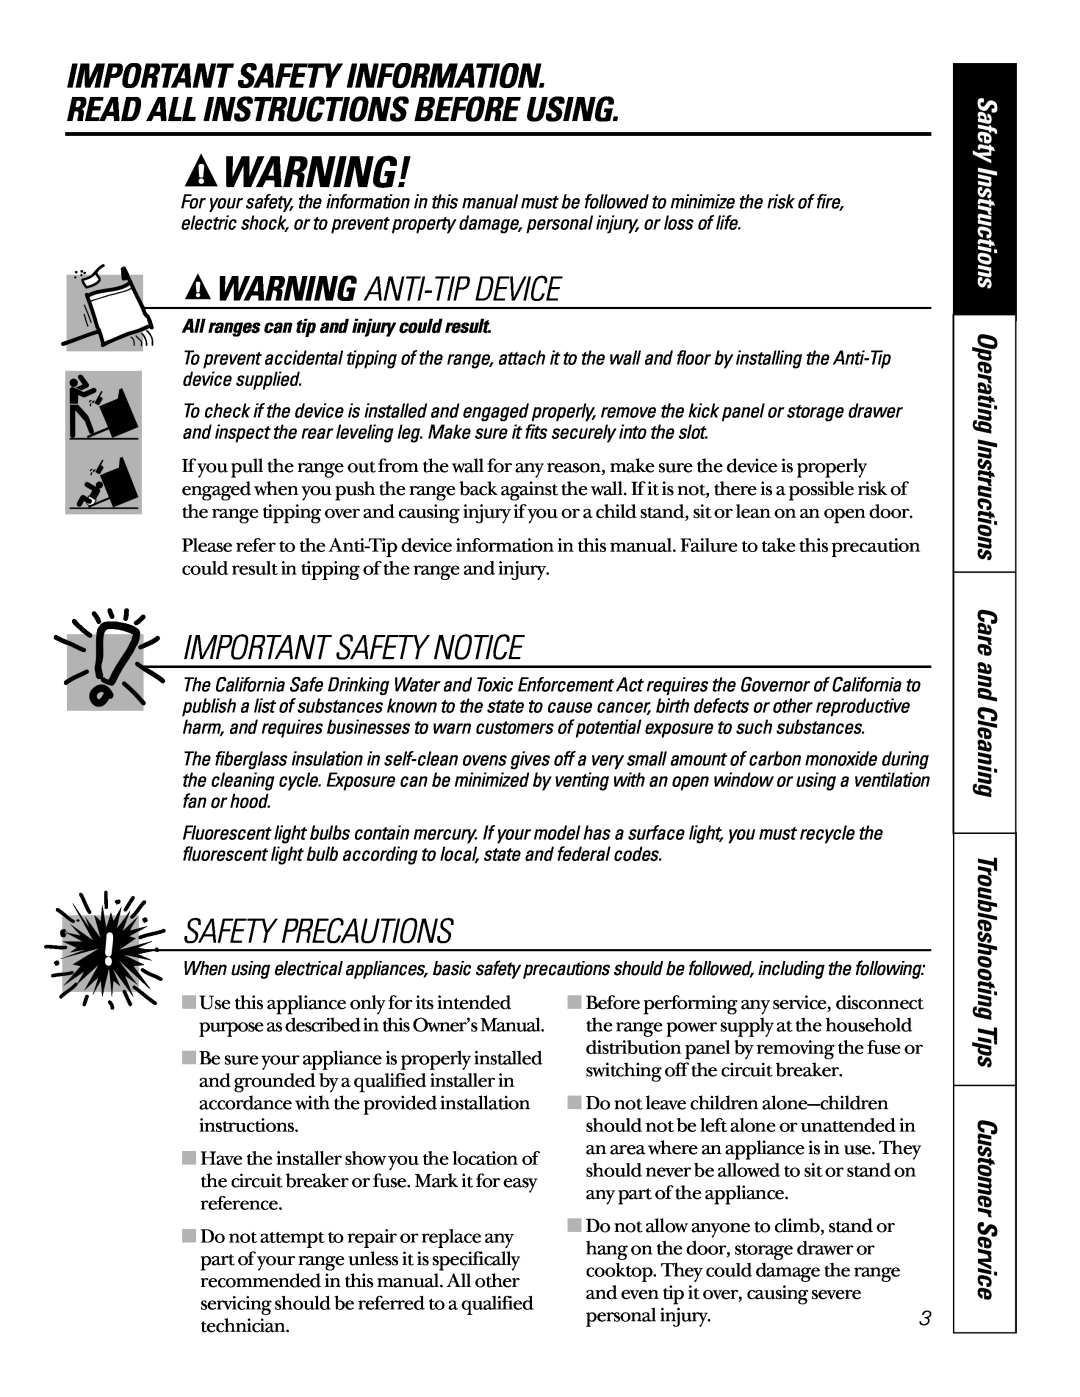 GE JBP24 Important Safety Information, Read All Instructions Before Using, Warning Anti-Tipdevice, Important Safety Notice 